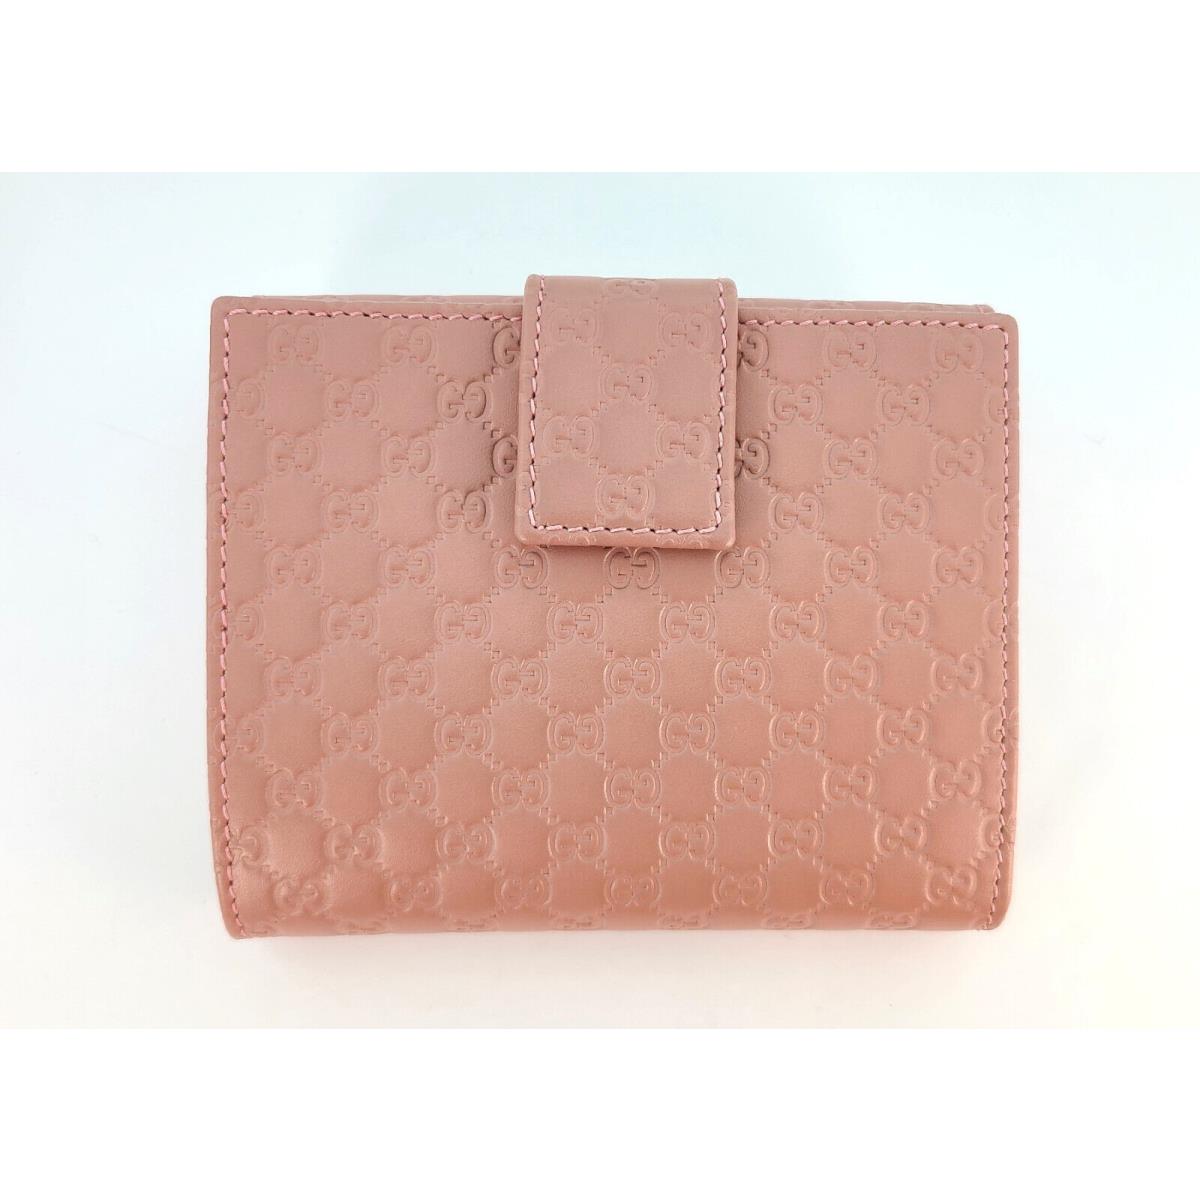 Gucci Women Soft Pink Shima Leather Bifold Micro GG Coin Wallet 464916